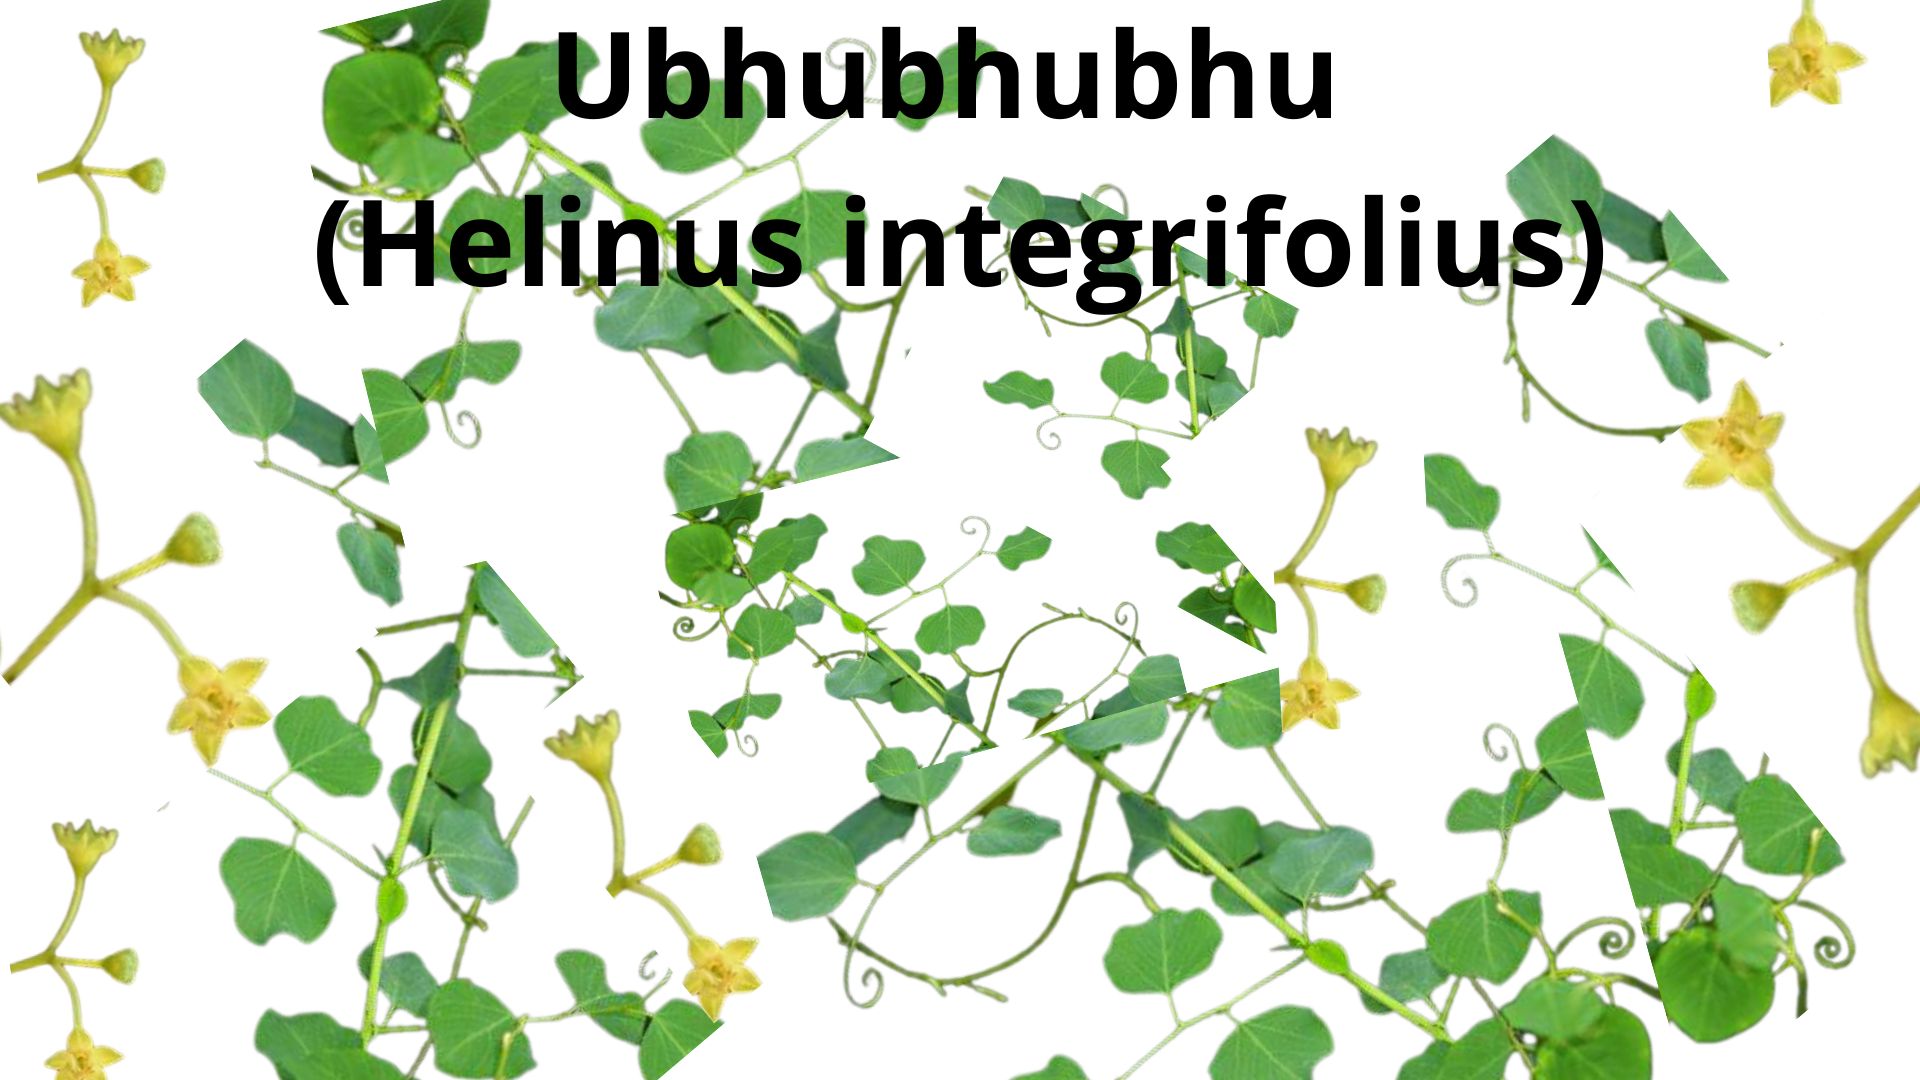 You are currently viewing <strong>Helinus integrifolius (Ubhubhubhu)</strong>